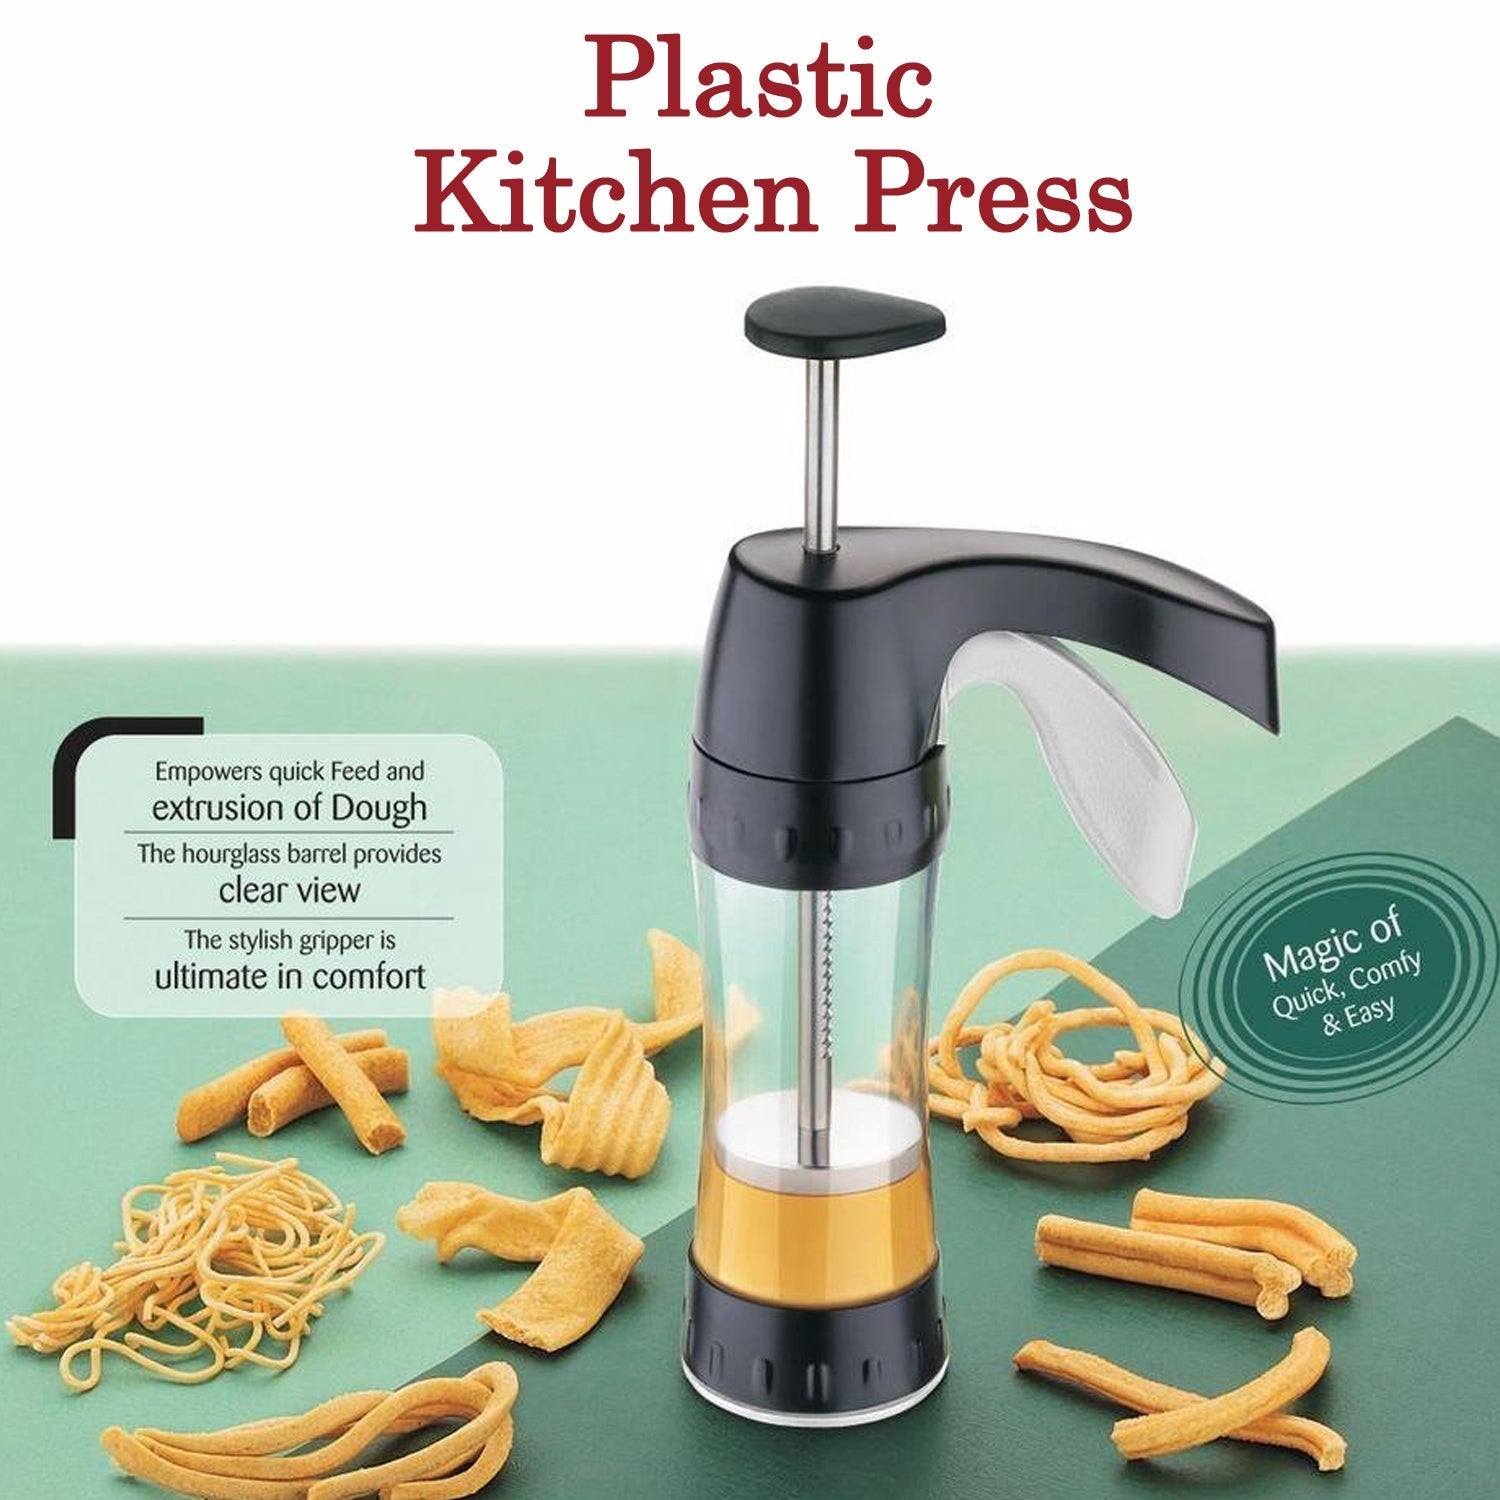 2718 Plastic Kitchen Press Aluminium Base used in all kinds of places mostly household kitchens while making dishes and tortillas etc.